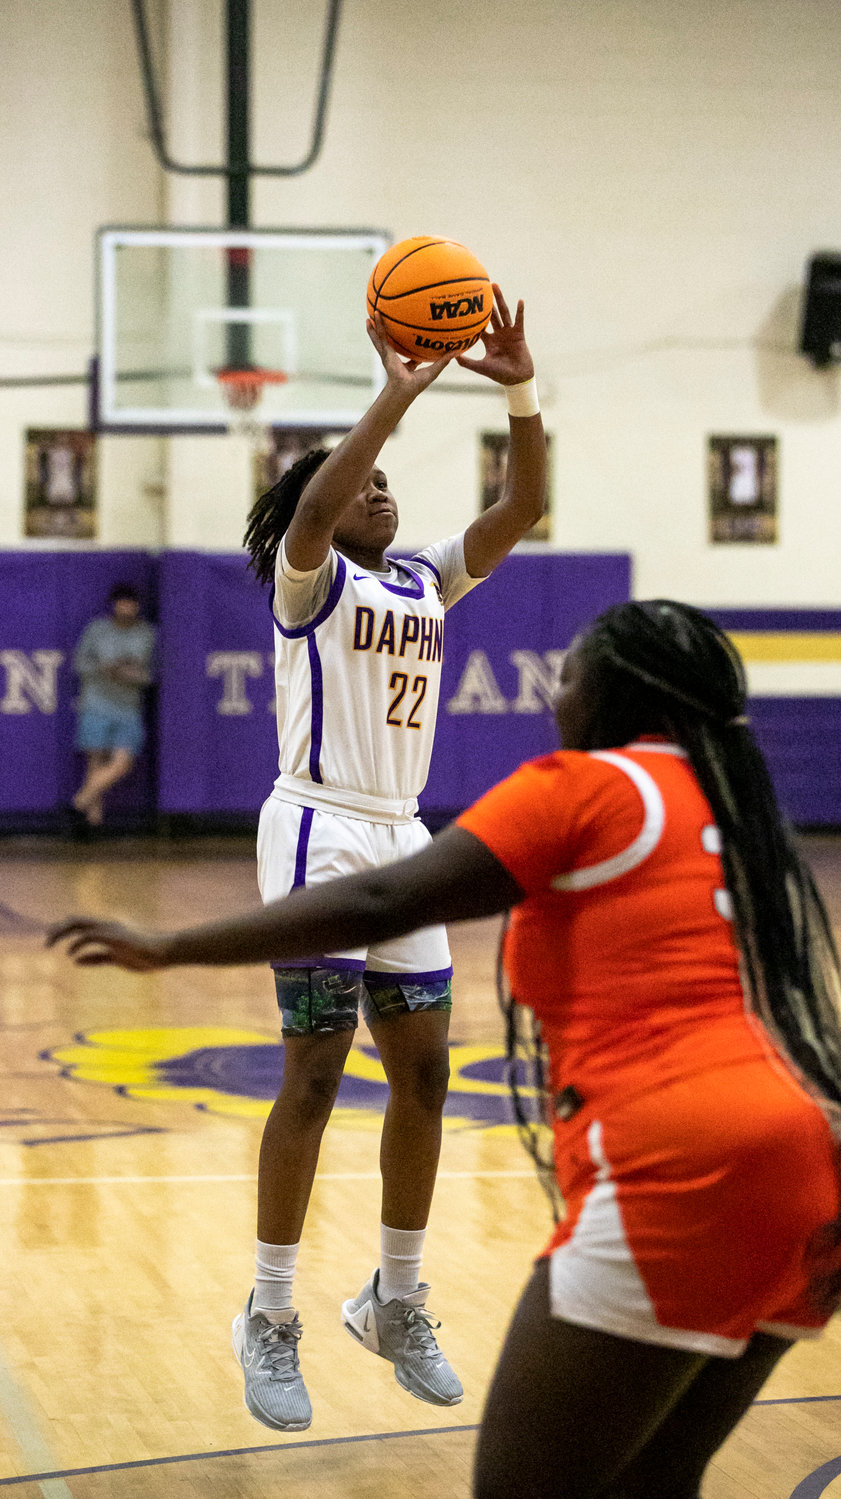 Daphne junior La’Merrica Johnson rises for a shot in the second half of the Trojans’ basketball game against the Baldwin County Tigers Tuesday night at home. Johnson contributed 14 points and 7 rebounds to Daphne’s 49-22 non-area win.